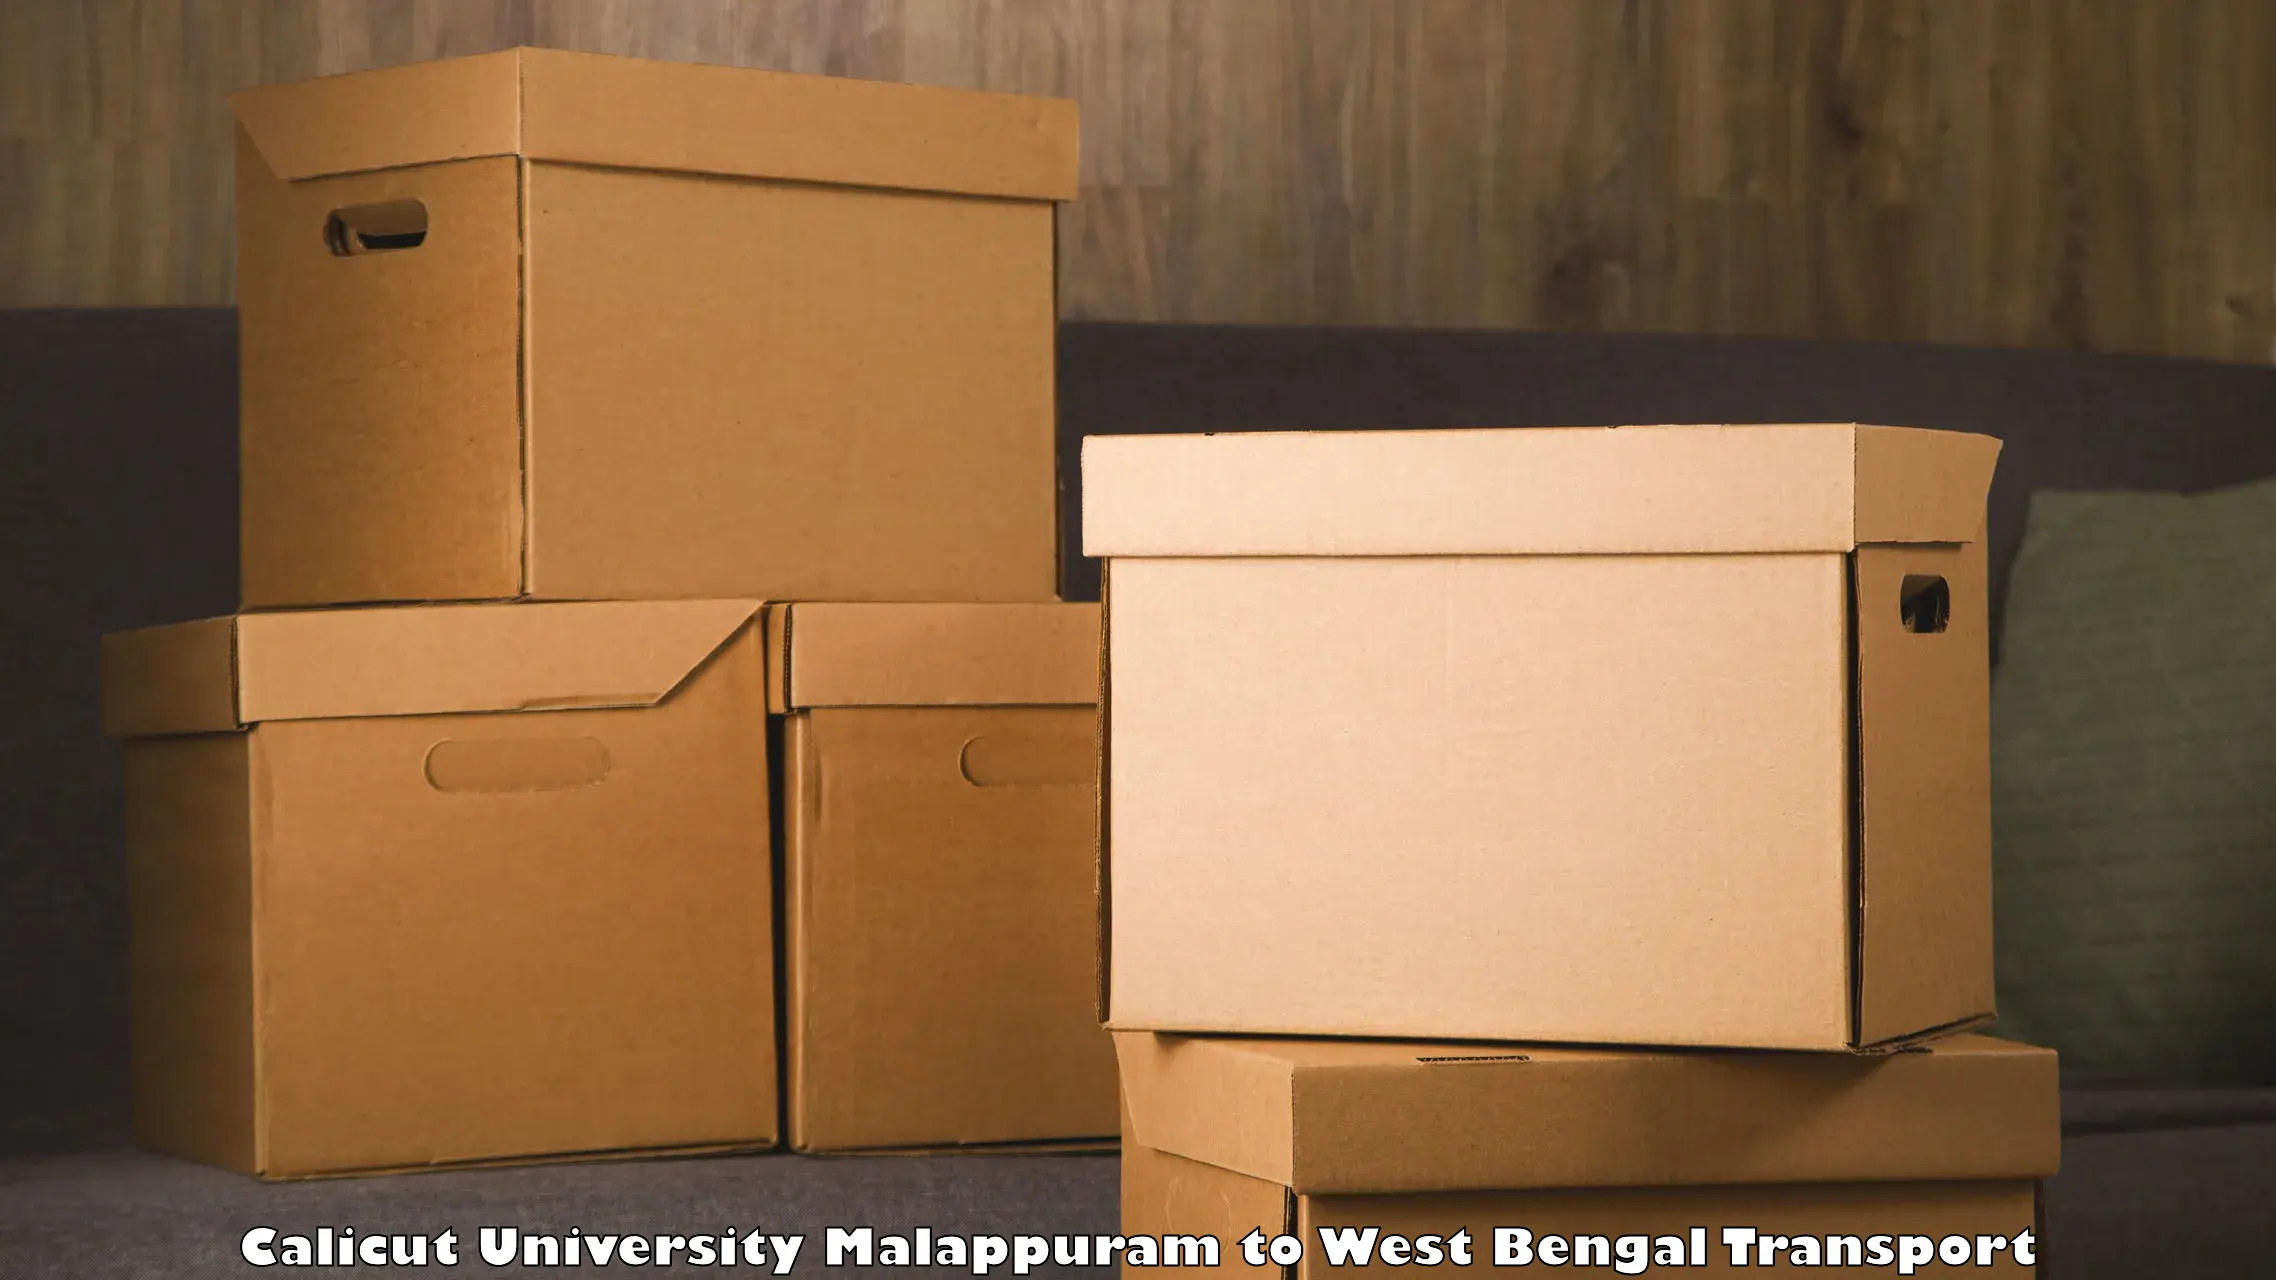 Package delivery services Calicut University Malappuram to West Bengal